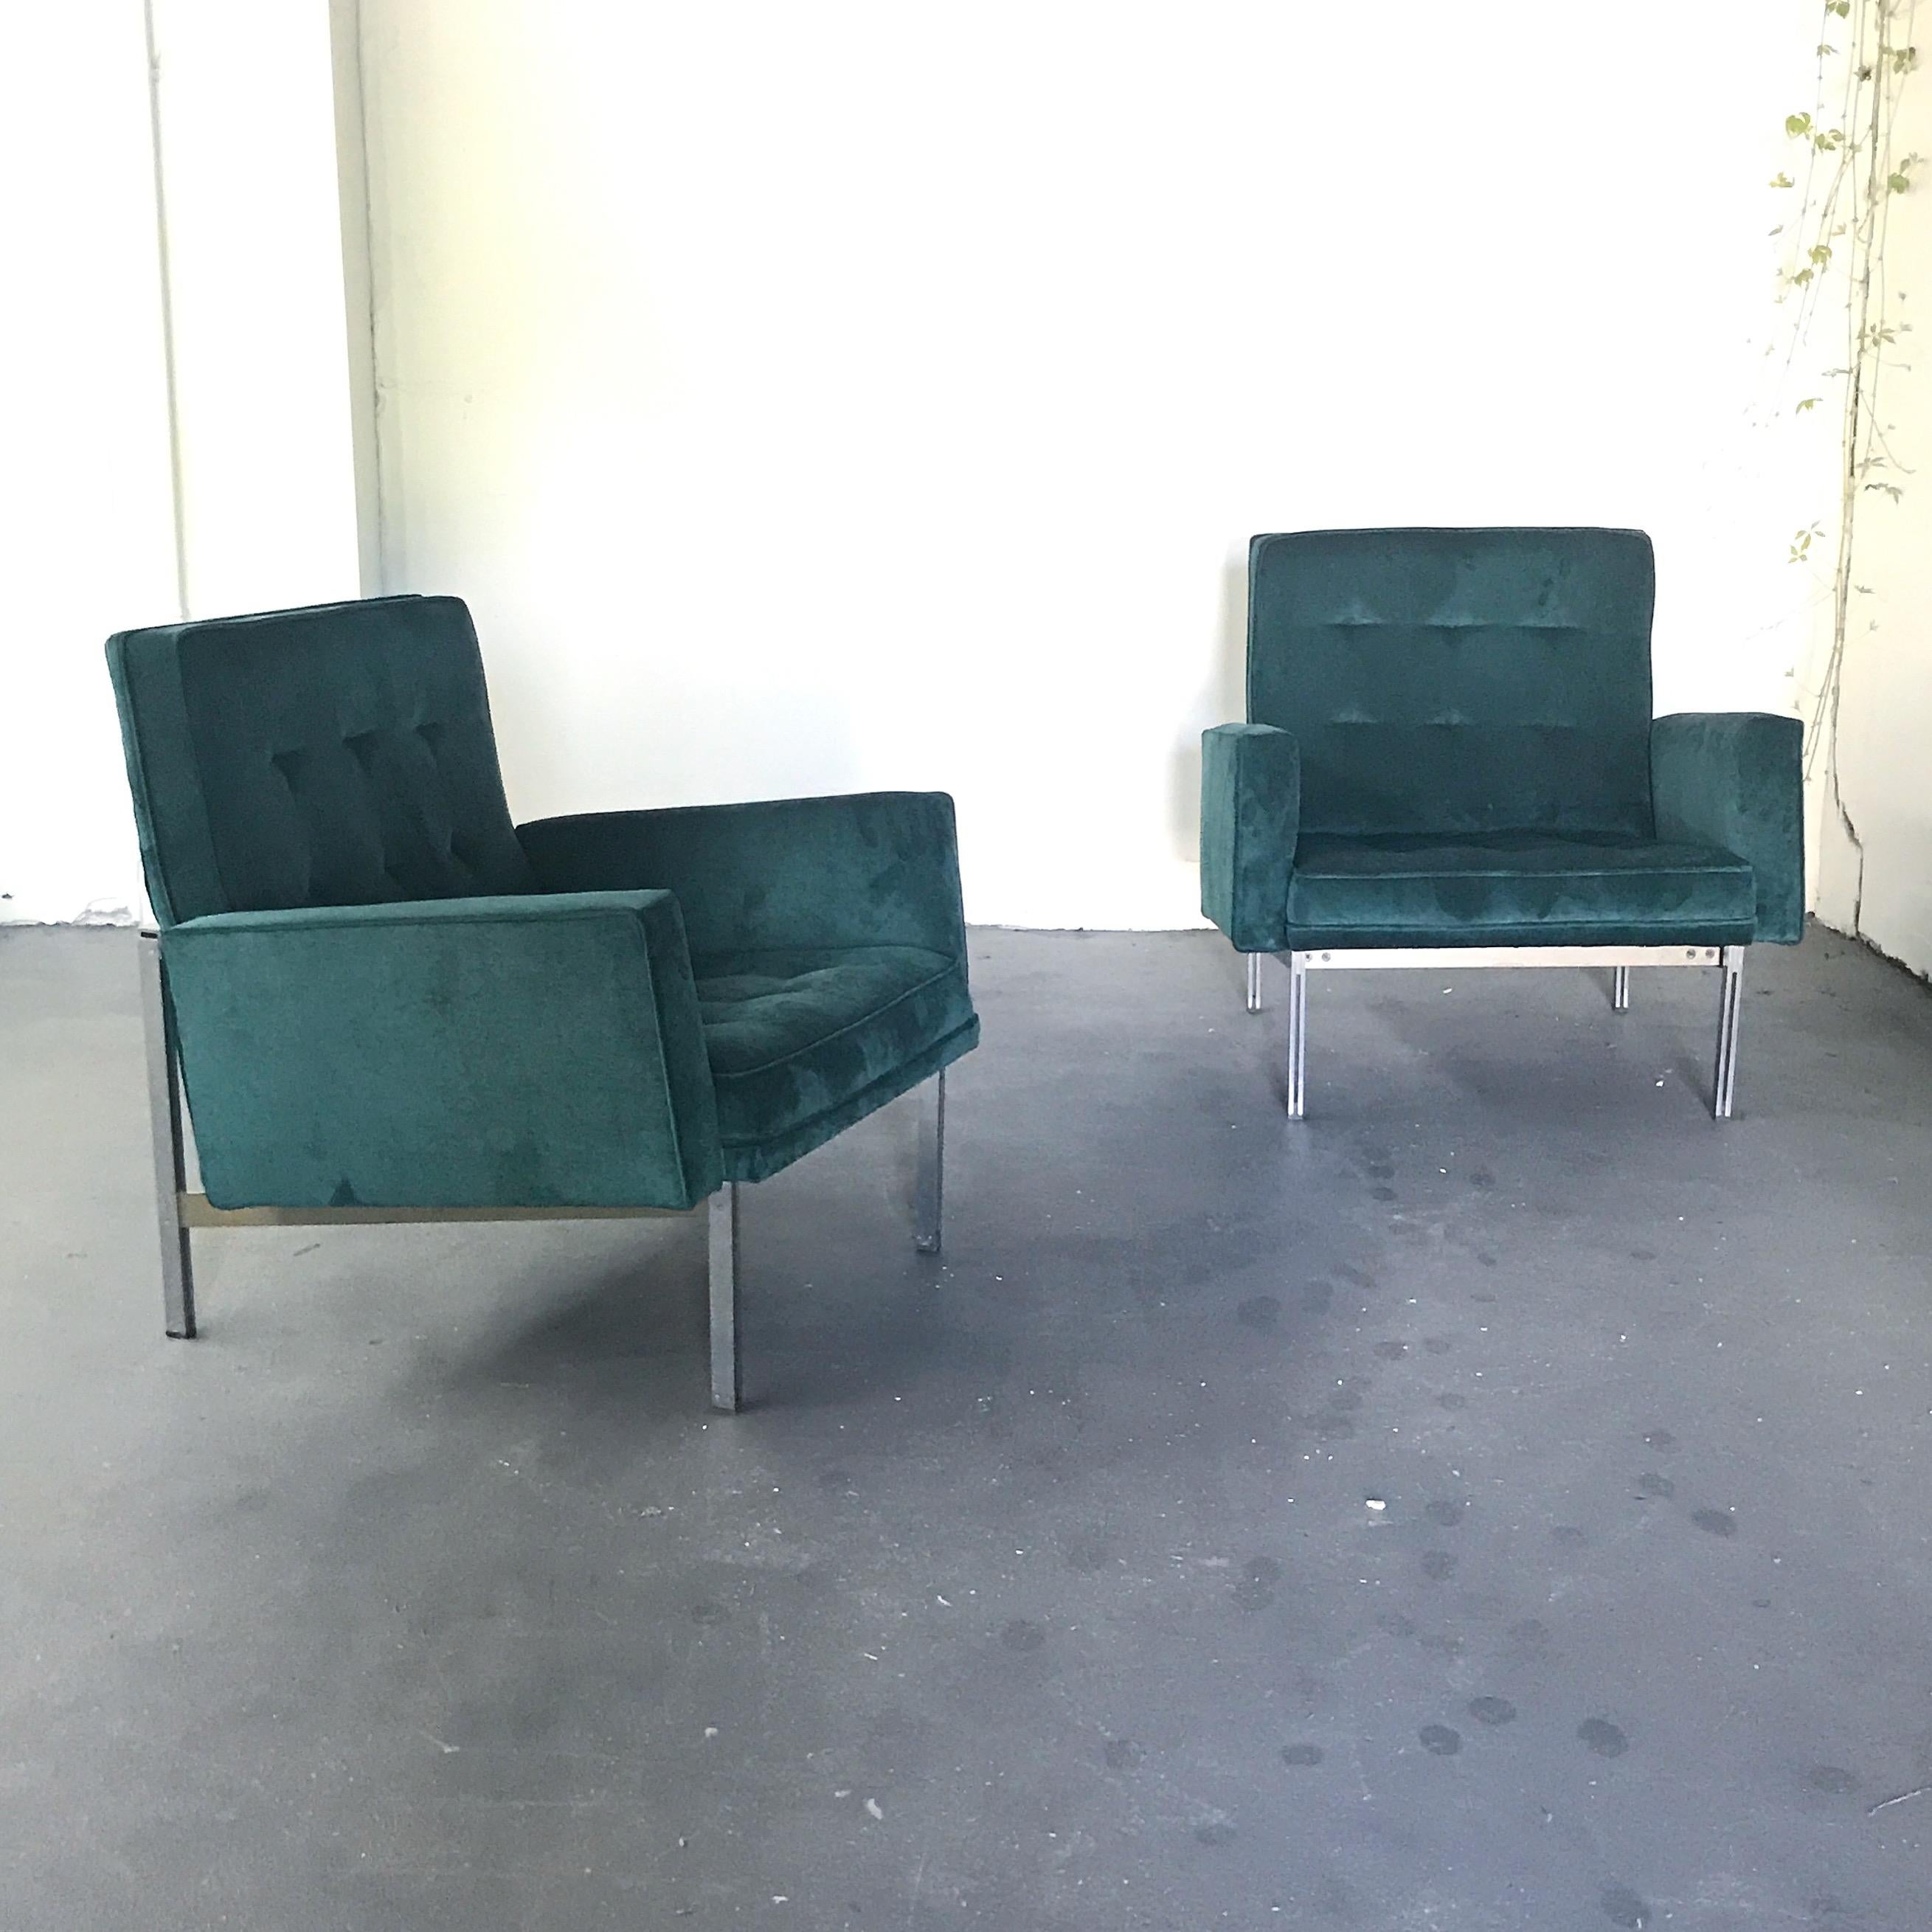 Pair of Florence Knoll Parallel Bar velvet lounge chairs in great condition.